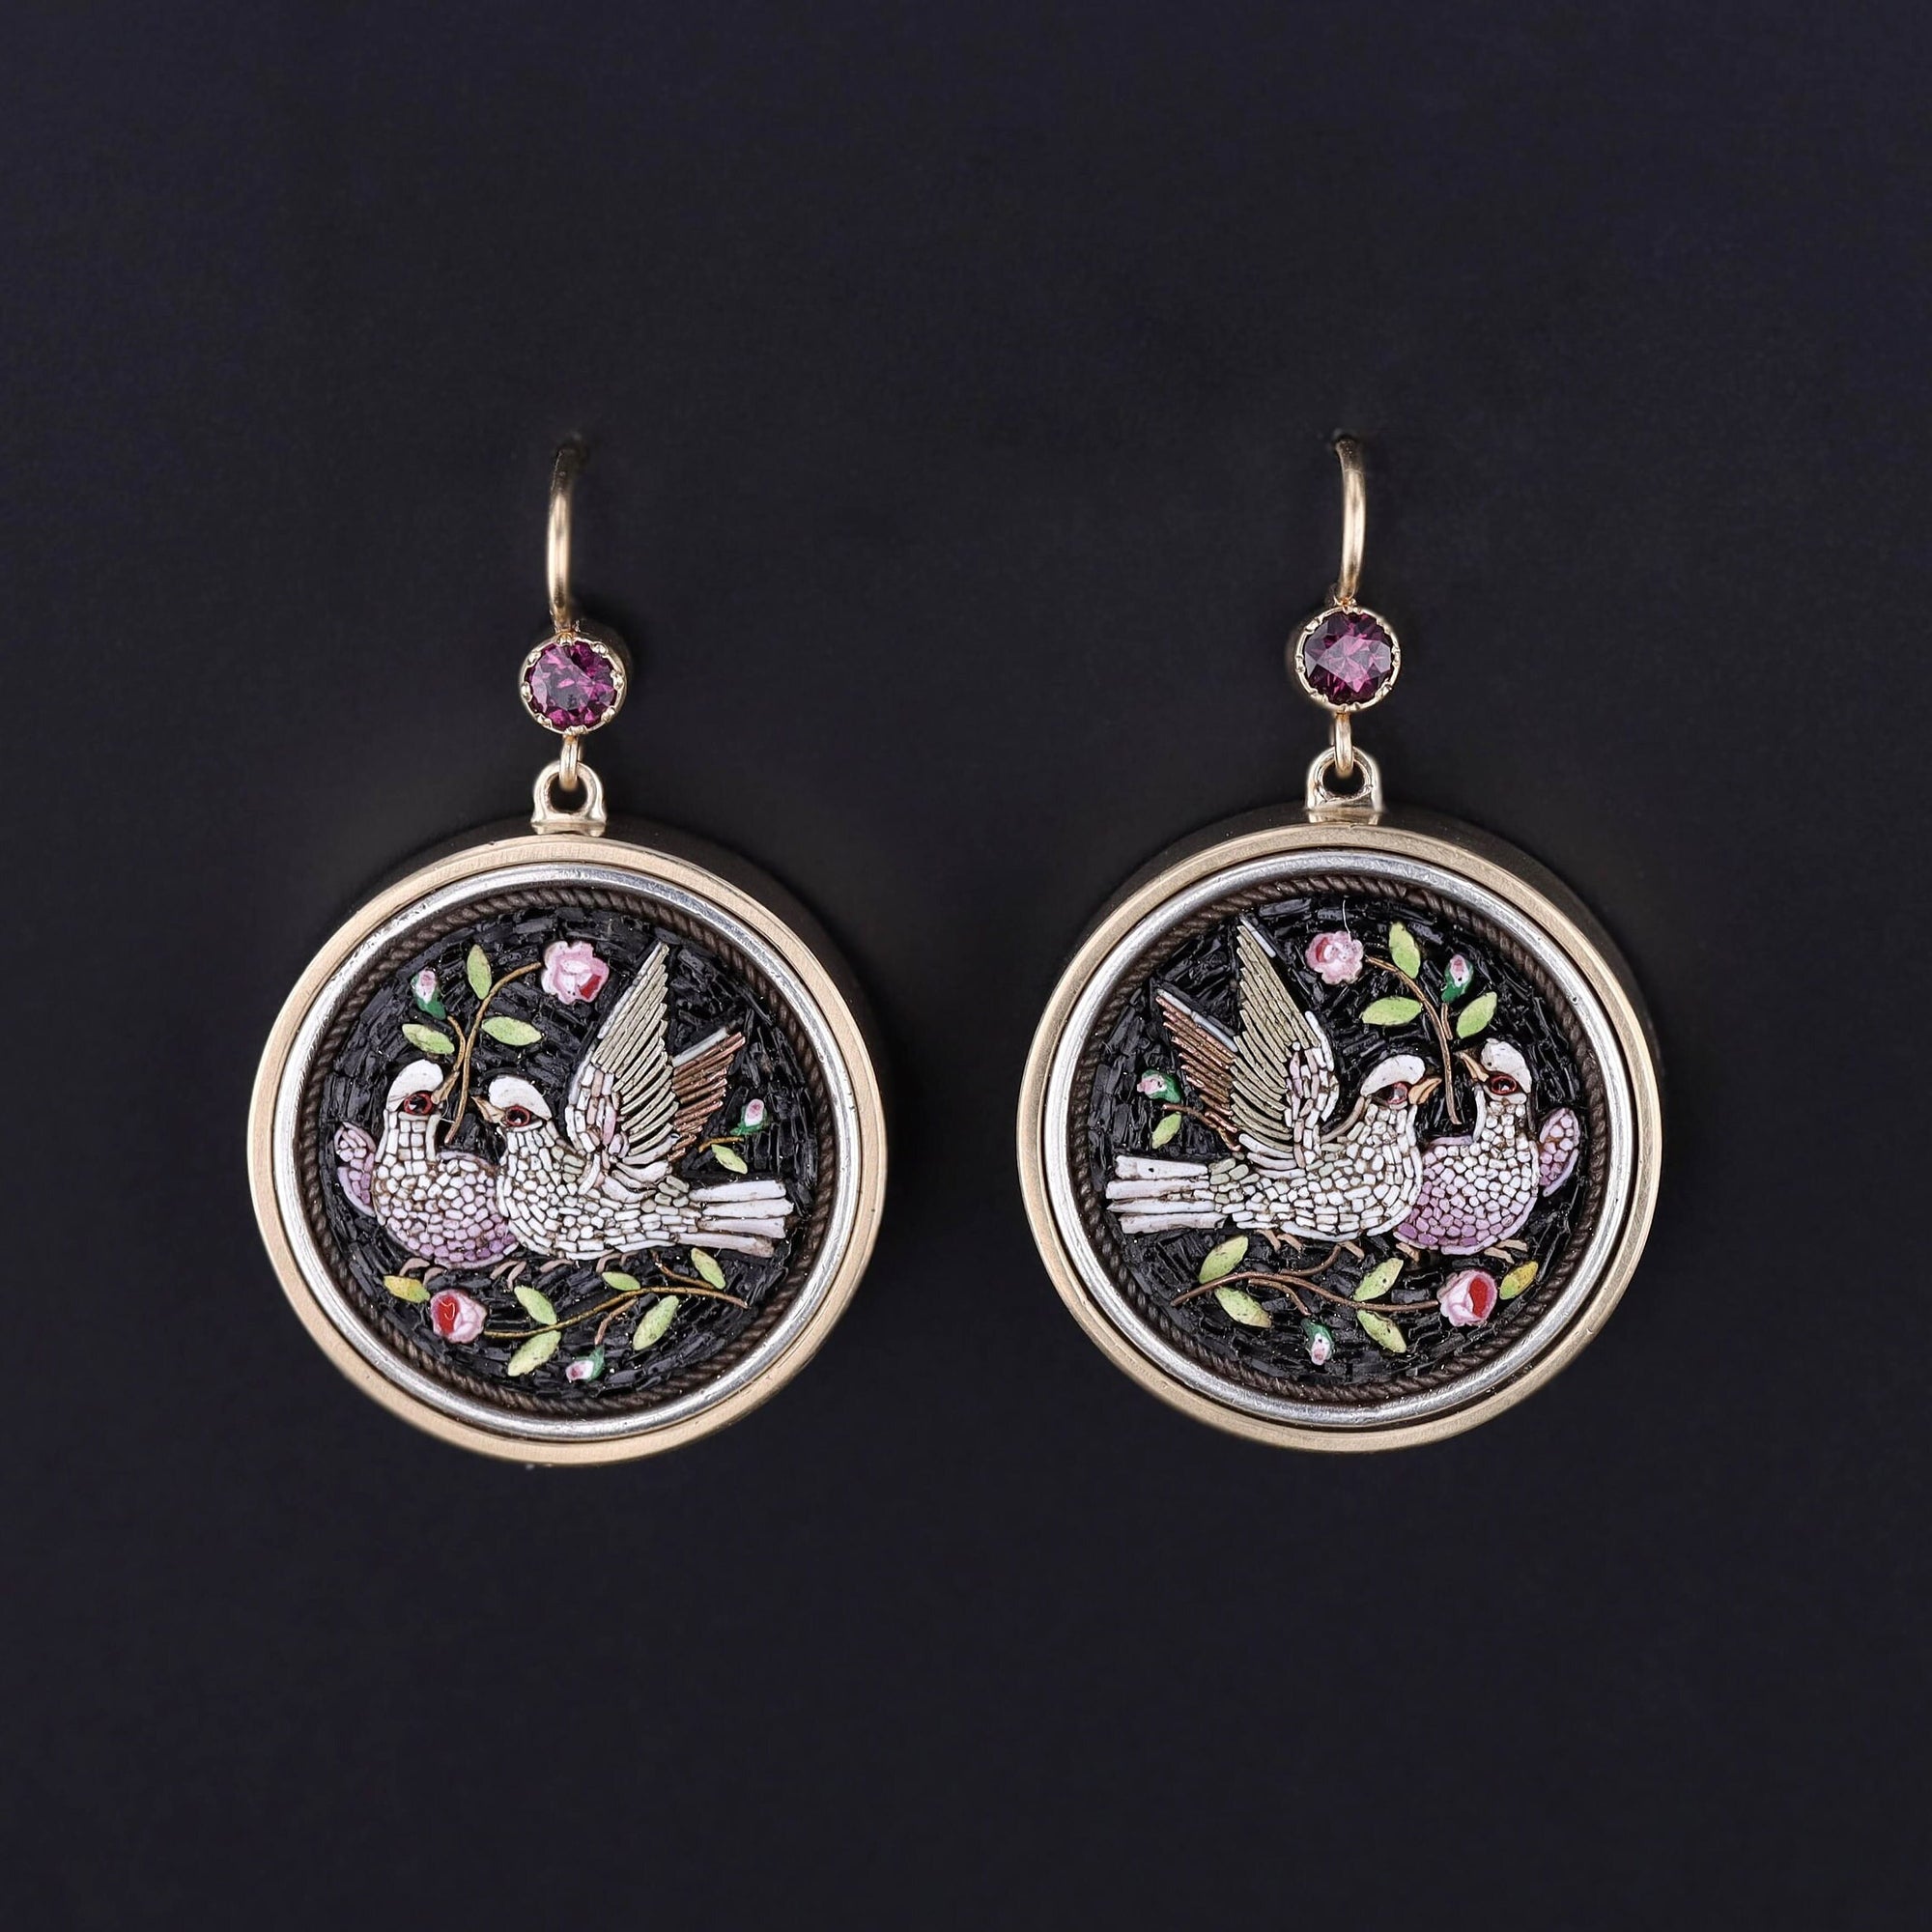 Antique Micromosaic Dove Earrings of 14k Gold